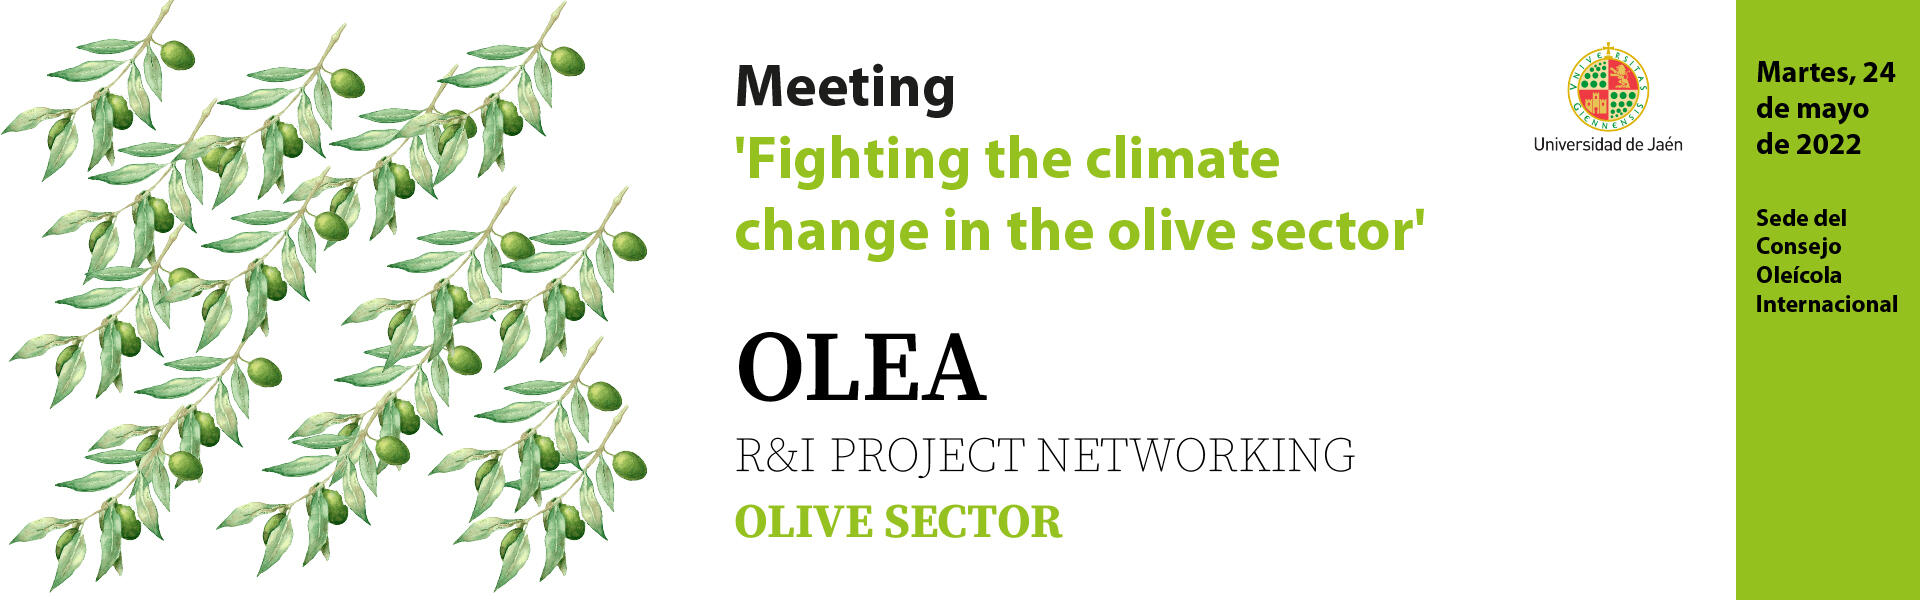 OLEA R&I PROJECT NETWORKING. Meeting 'Fighting the climate  change in the olive sector'